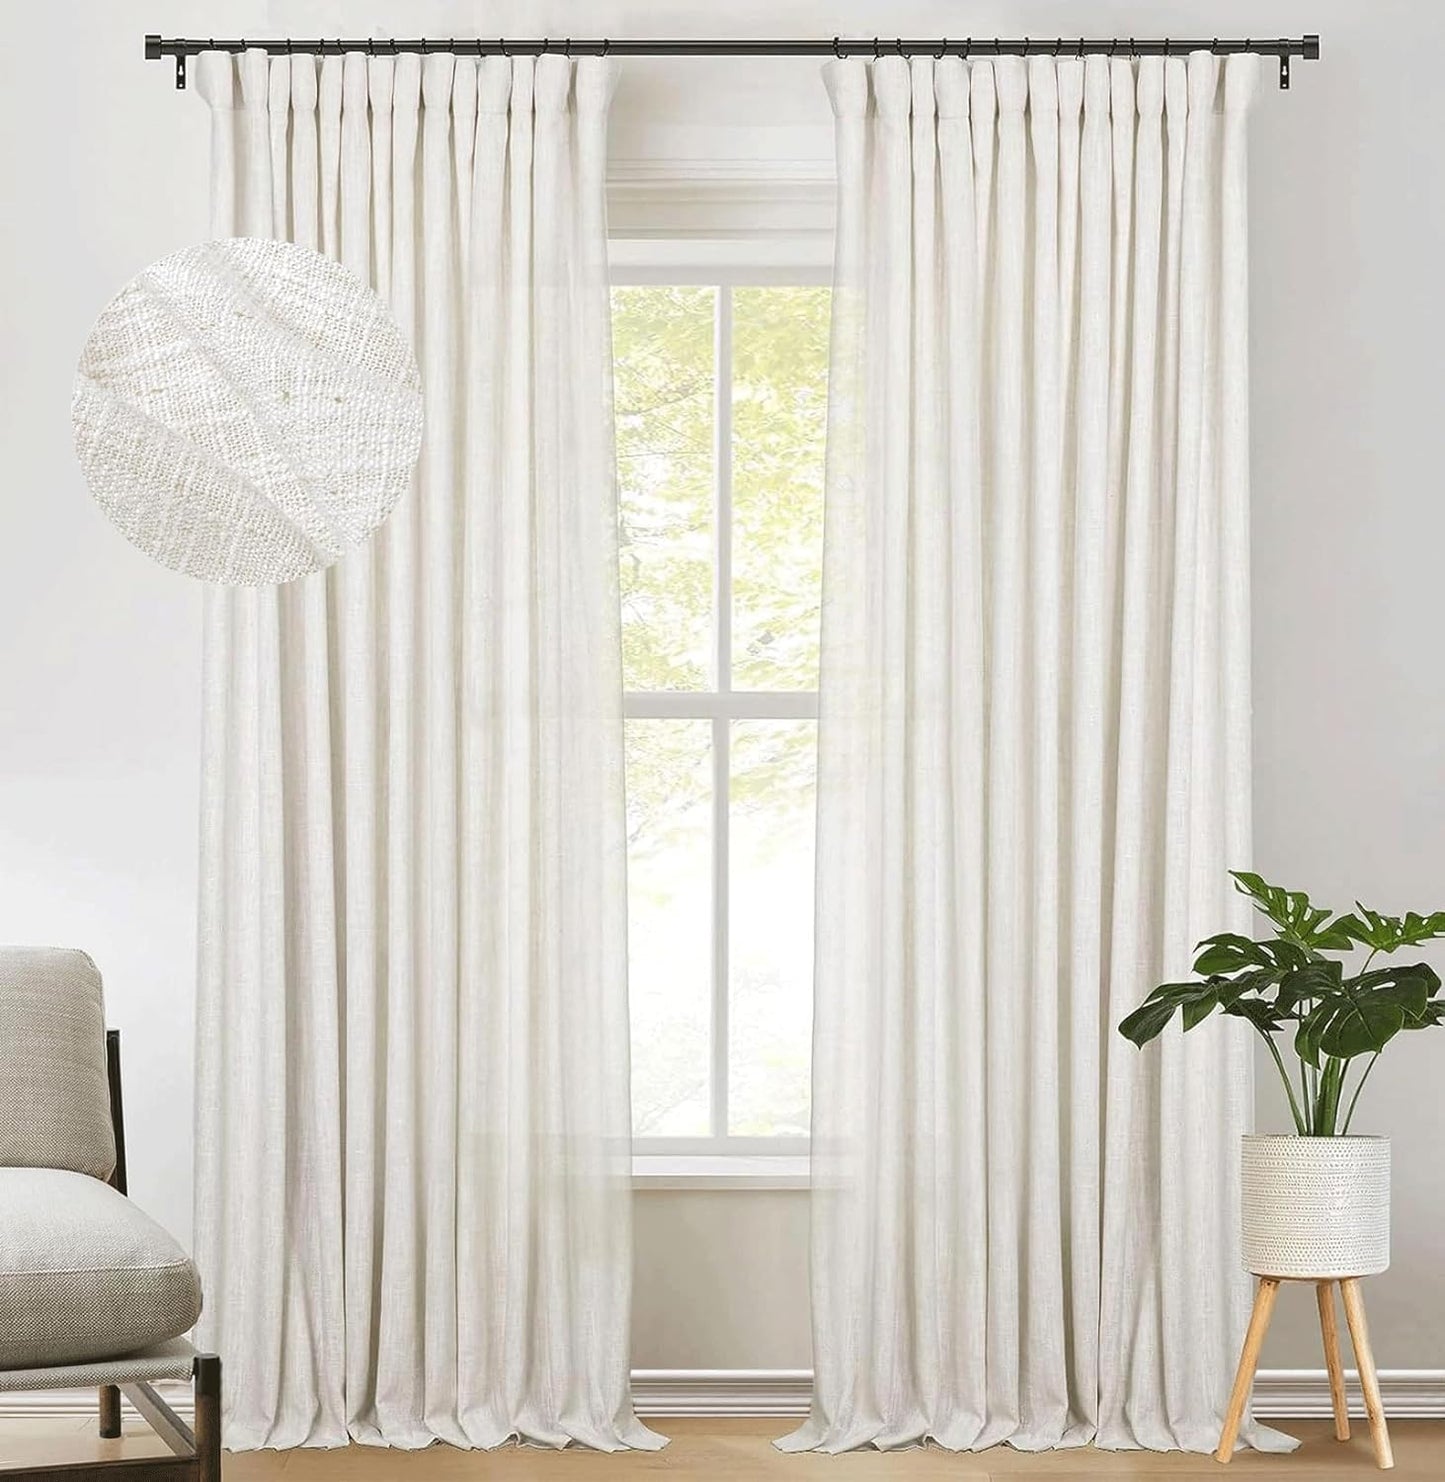 Zeerobee Beige White Linen Curtains for Living Room/Bedroom Linen Curtains 96 Inches Long 2 Panels Linen Drapes Farmhouse Pinch Pleated Curtains Light Filtering Privacy Curtains, W50 X L96  zeerobee 01 Beige White 50"W X 90"L 